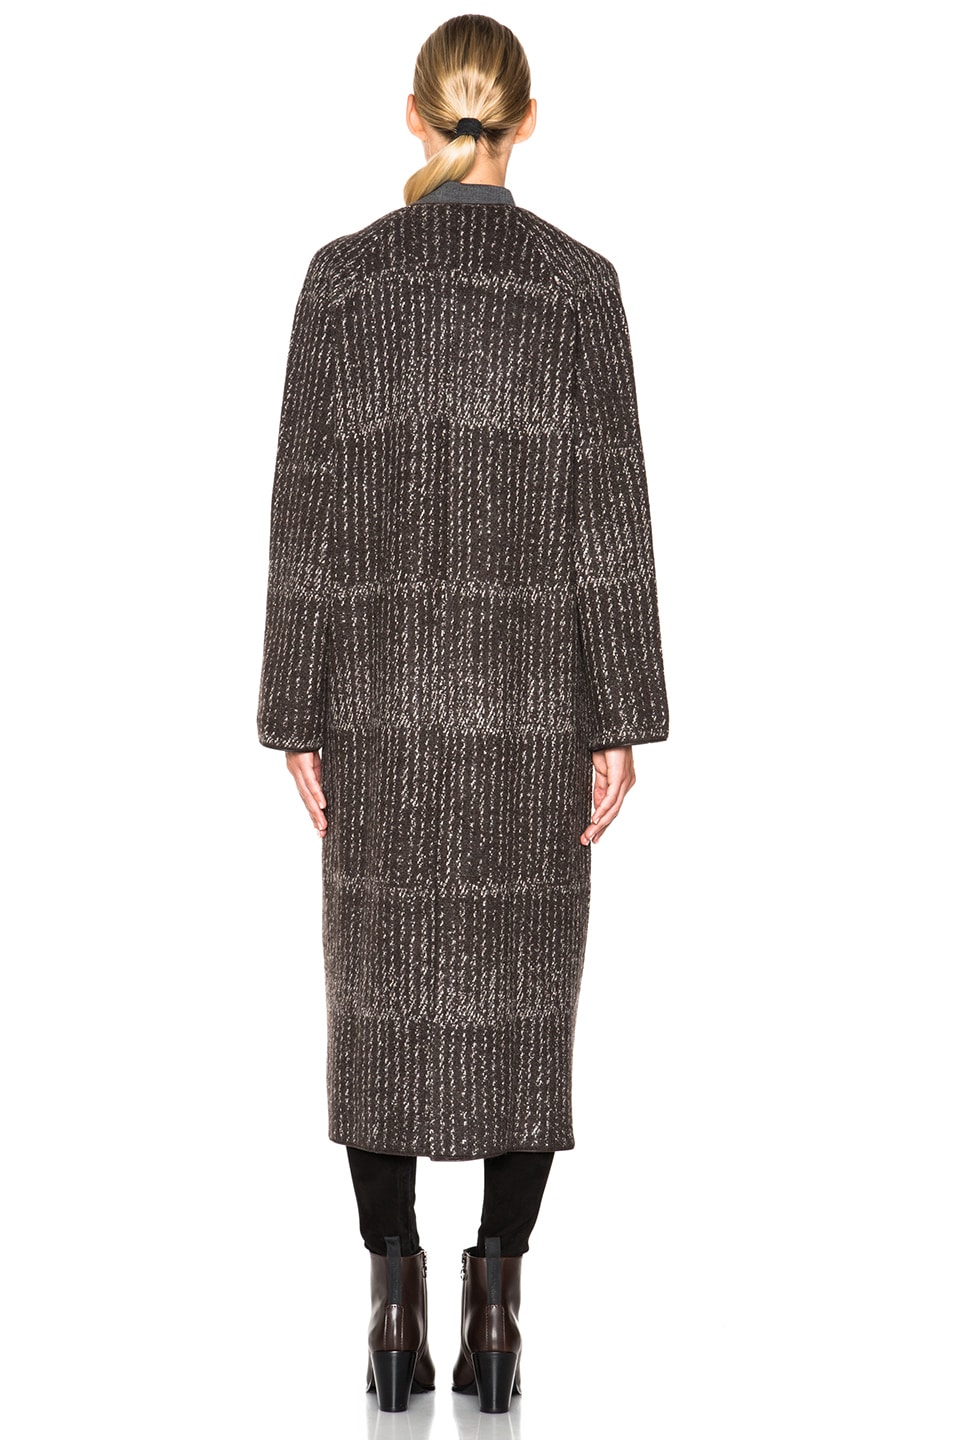 Calvin Klein Collection Vana Overpressed Jacquard Coat in Taupe | FWRD